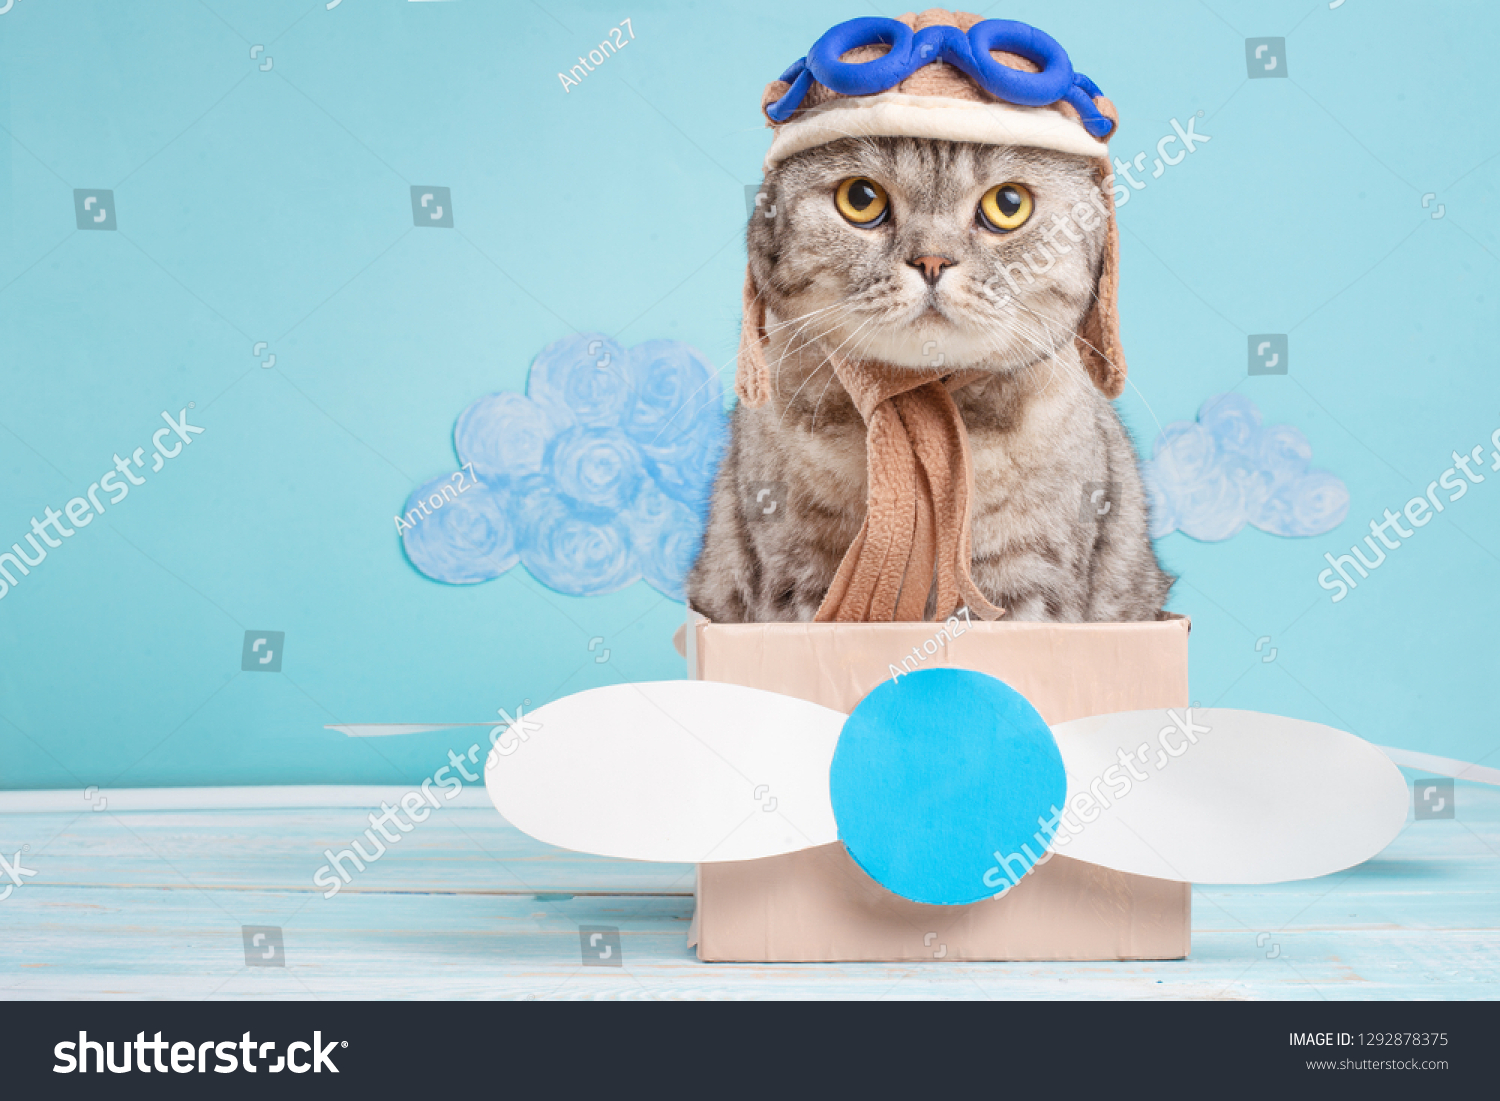 Very funny cat pilot of an airplane with glasses and a pilot's hat sitting on a plane, against the background of clouds. Concept of funny and funny animals #1292878375